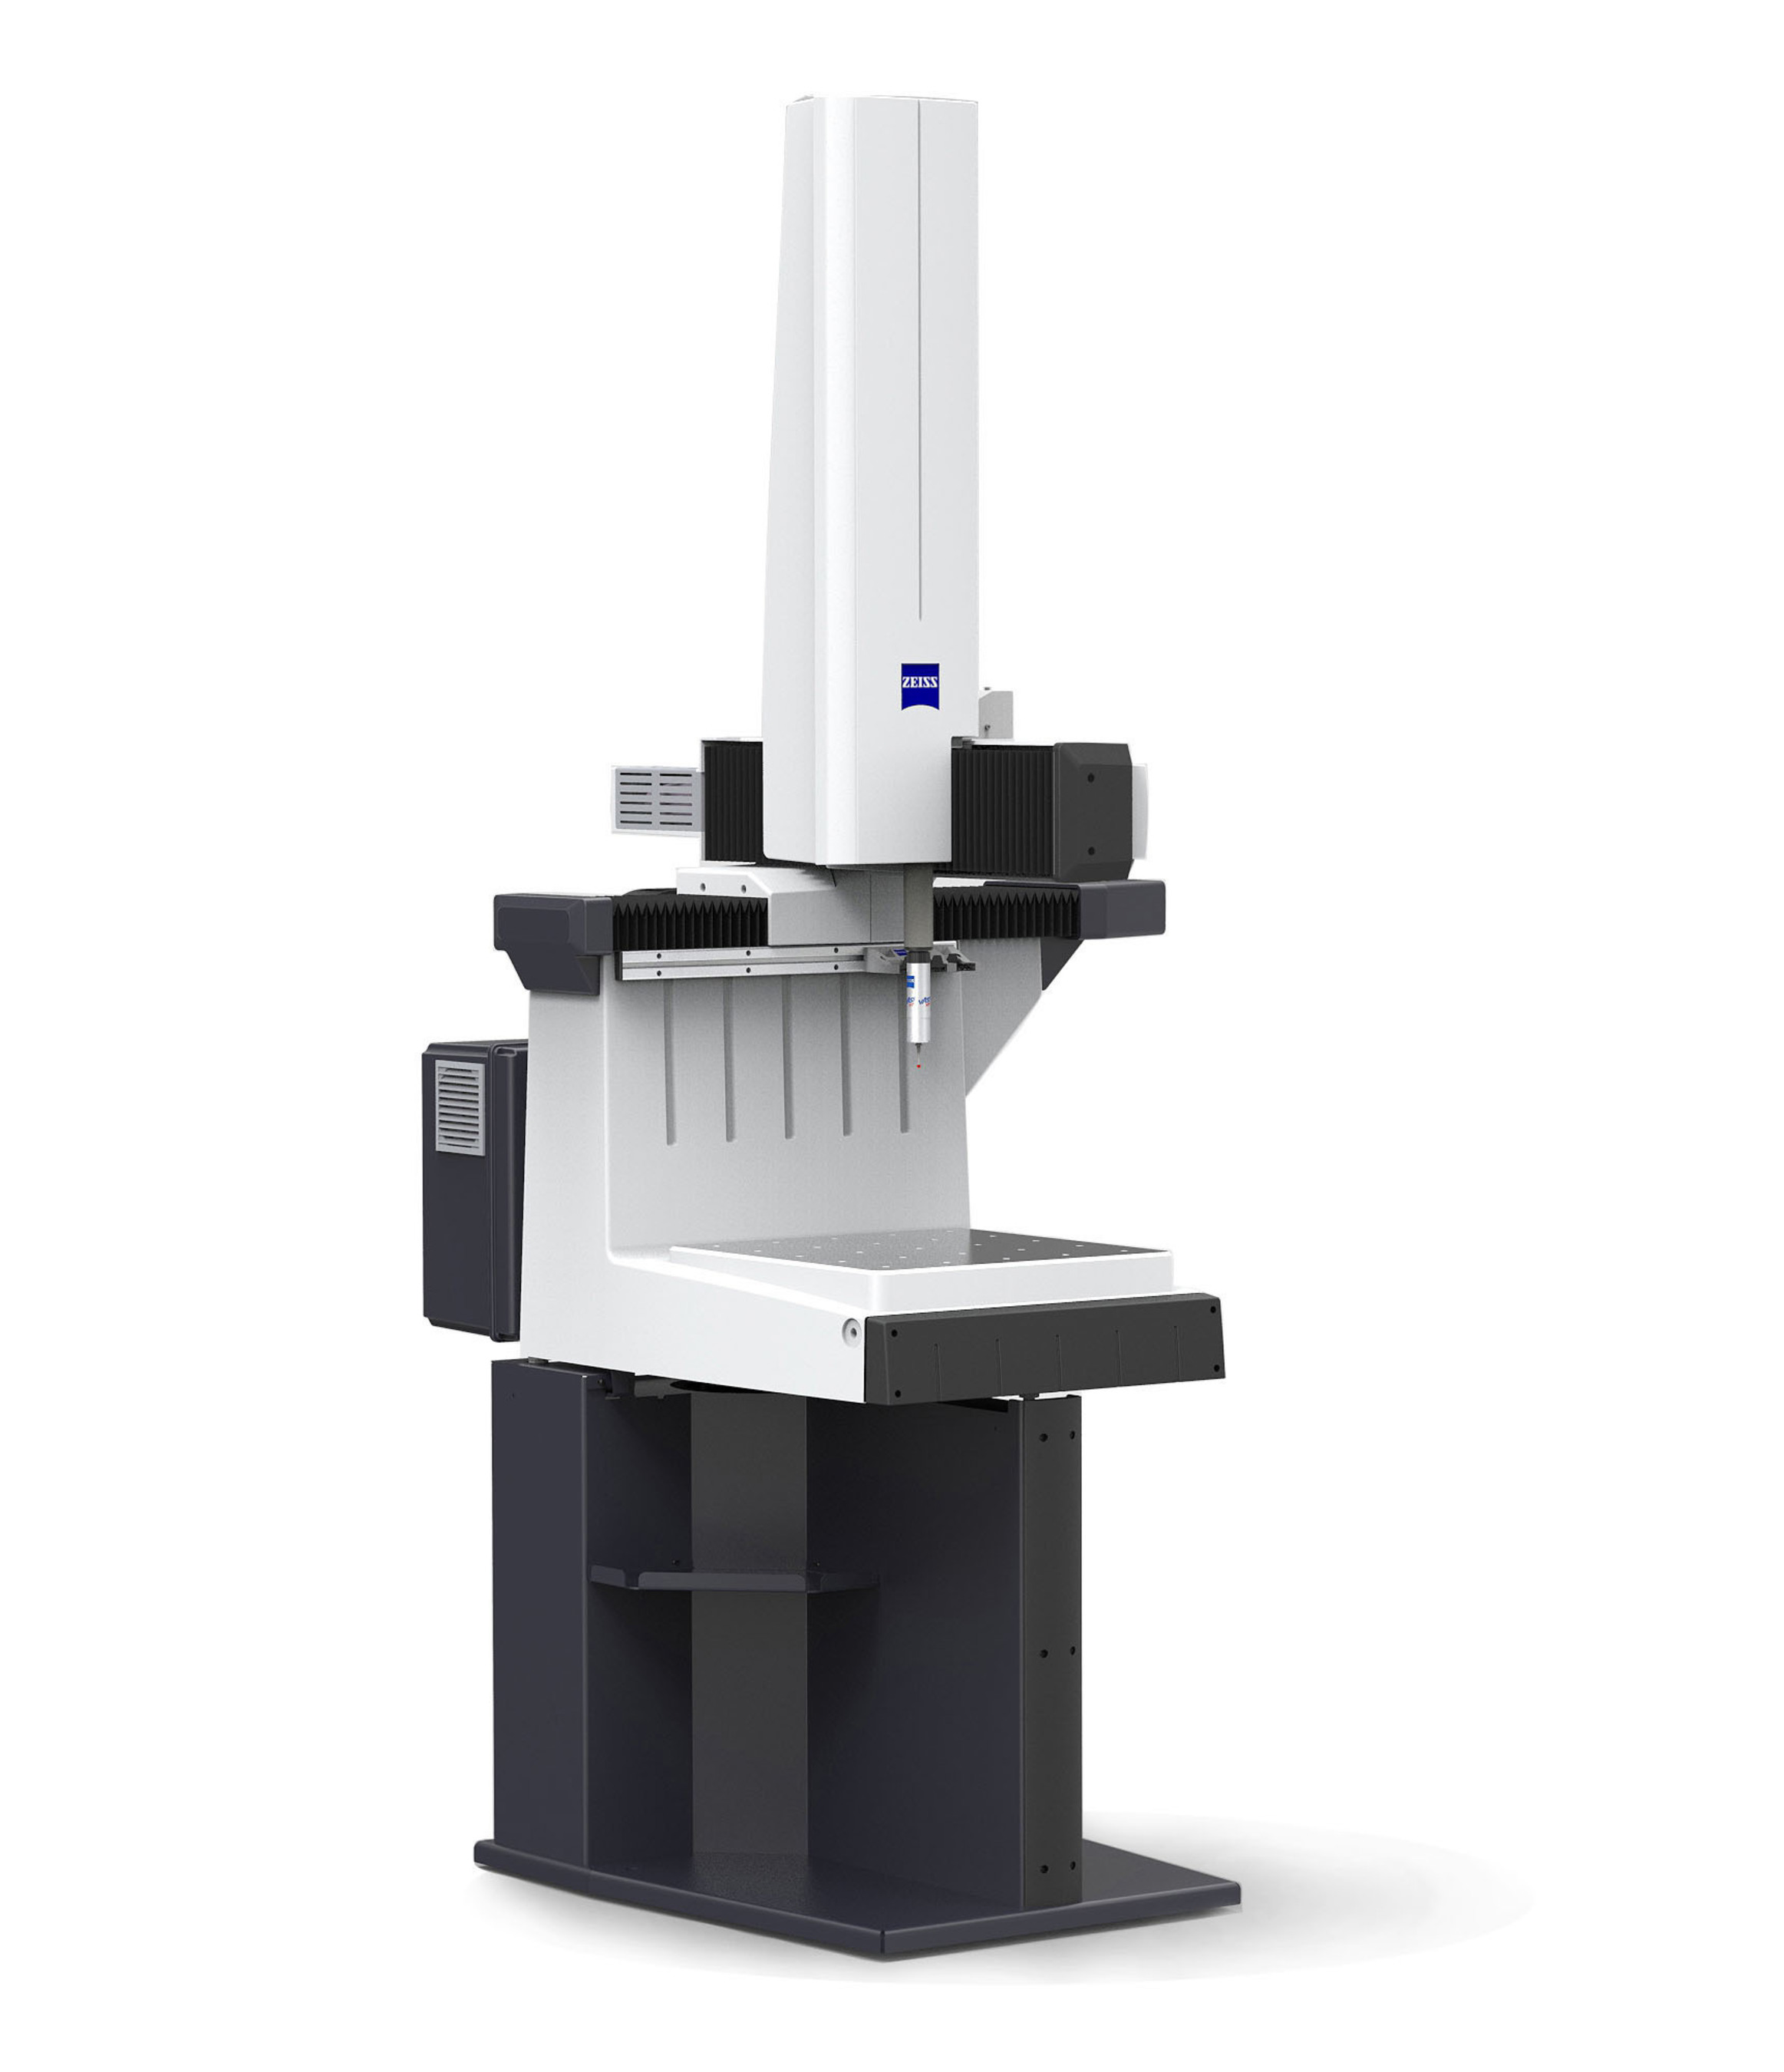 ZEISS DuraMax LTE CMM brings precision measurement to new level of affordability